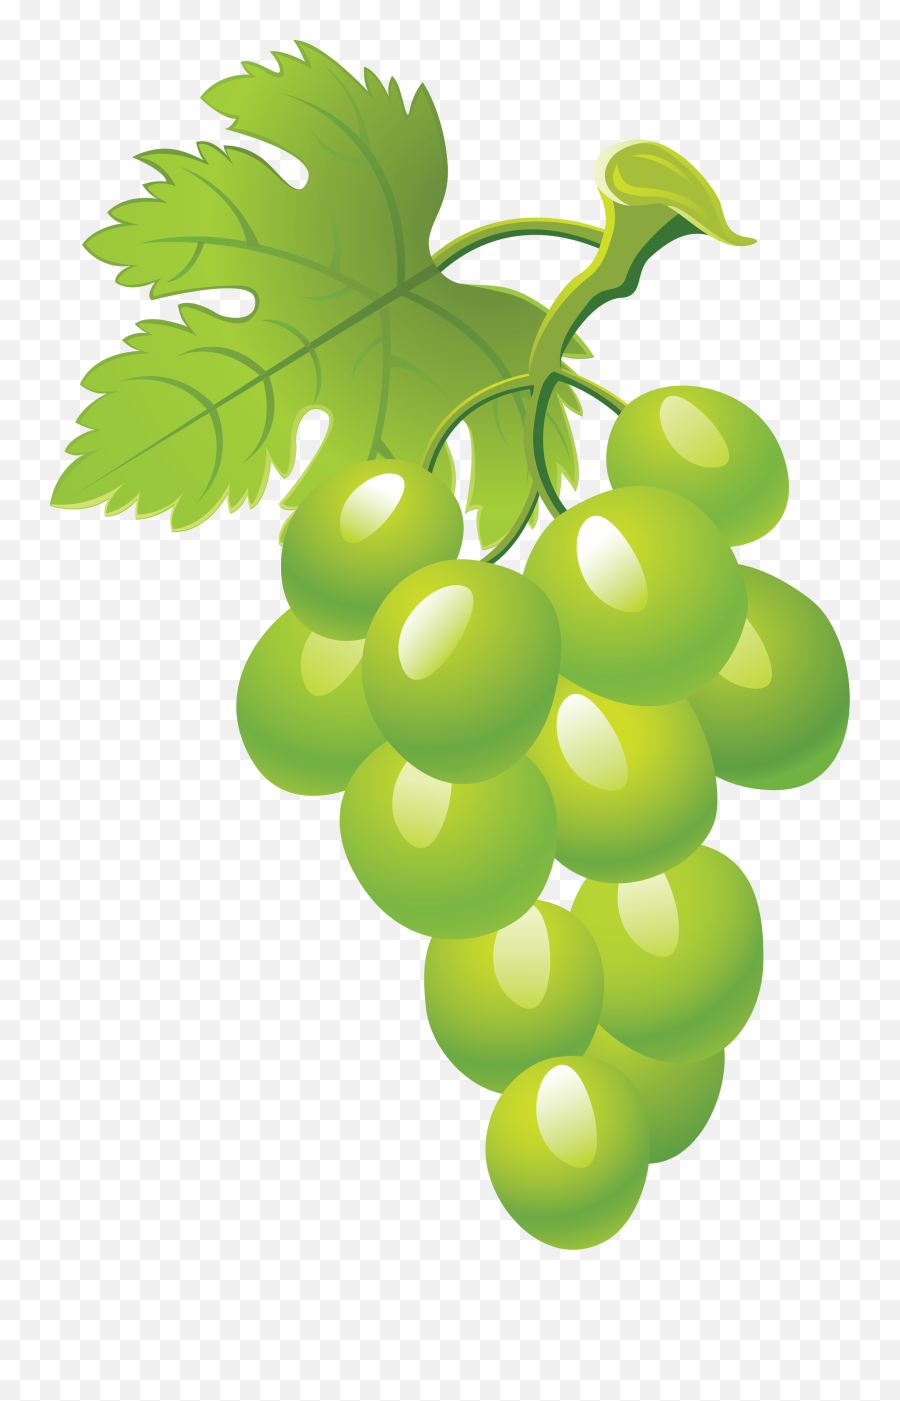 Green Grapes Clipart - Transparent Background Green Grapes Clipart Emoji,Grapes Clipart